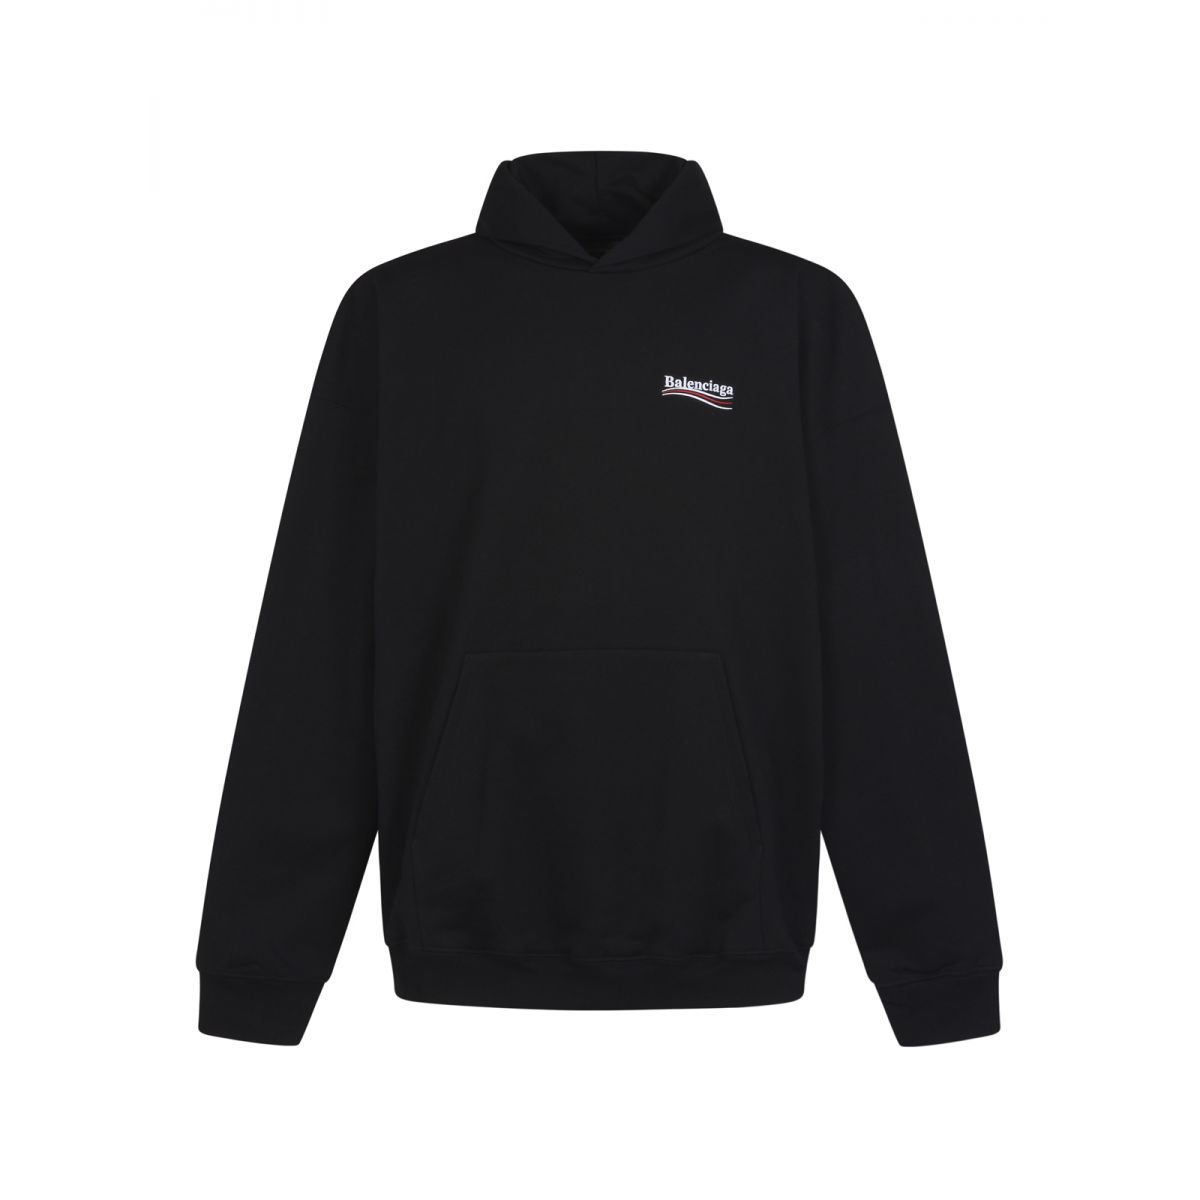 BALENCIAGA - Embroidered Political Campaign Large Fit Hoodie in Black